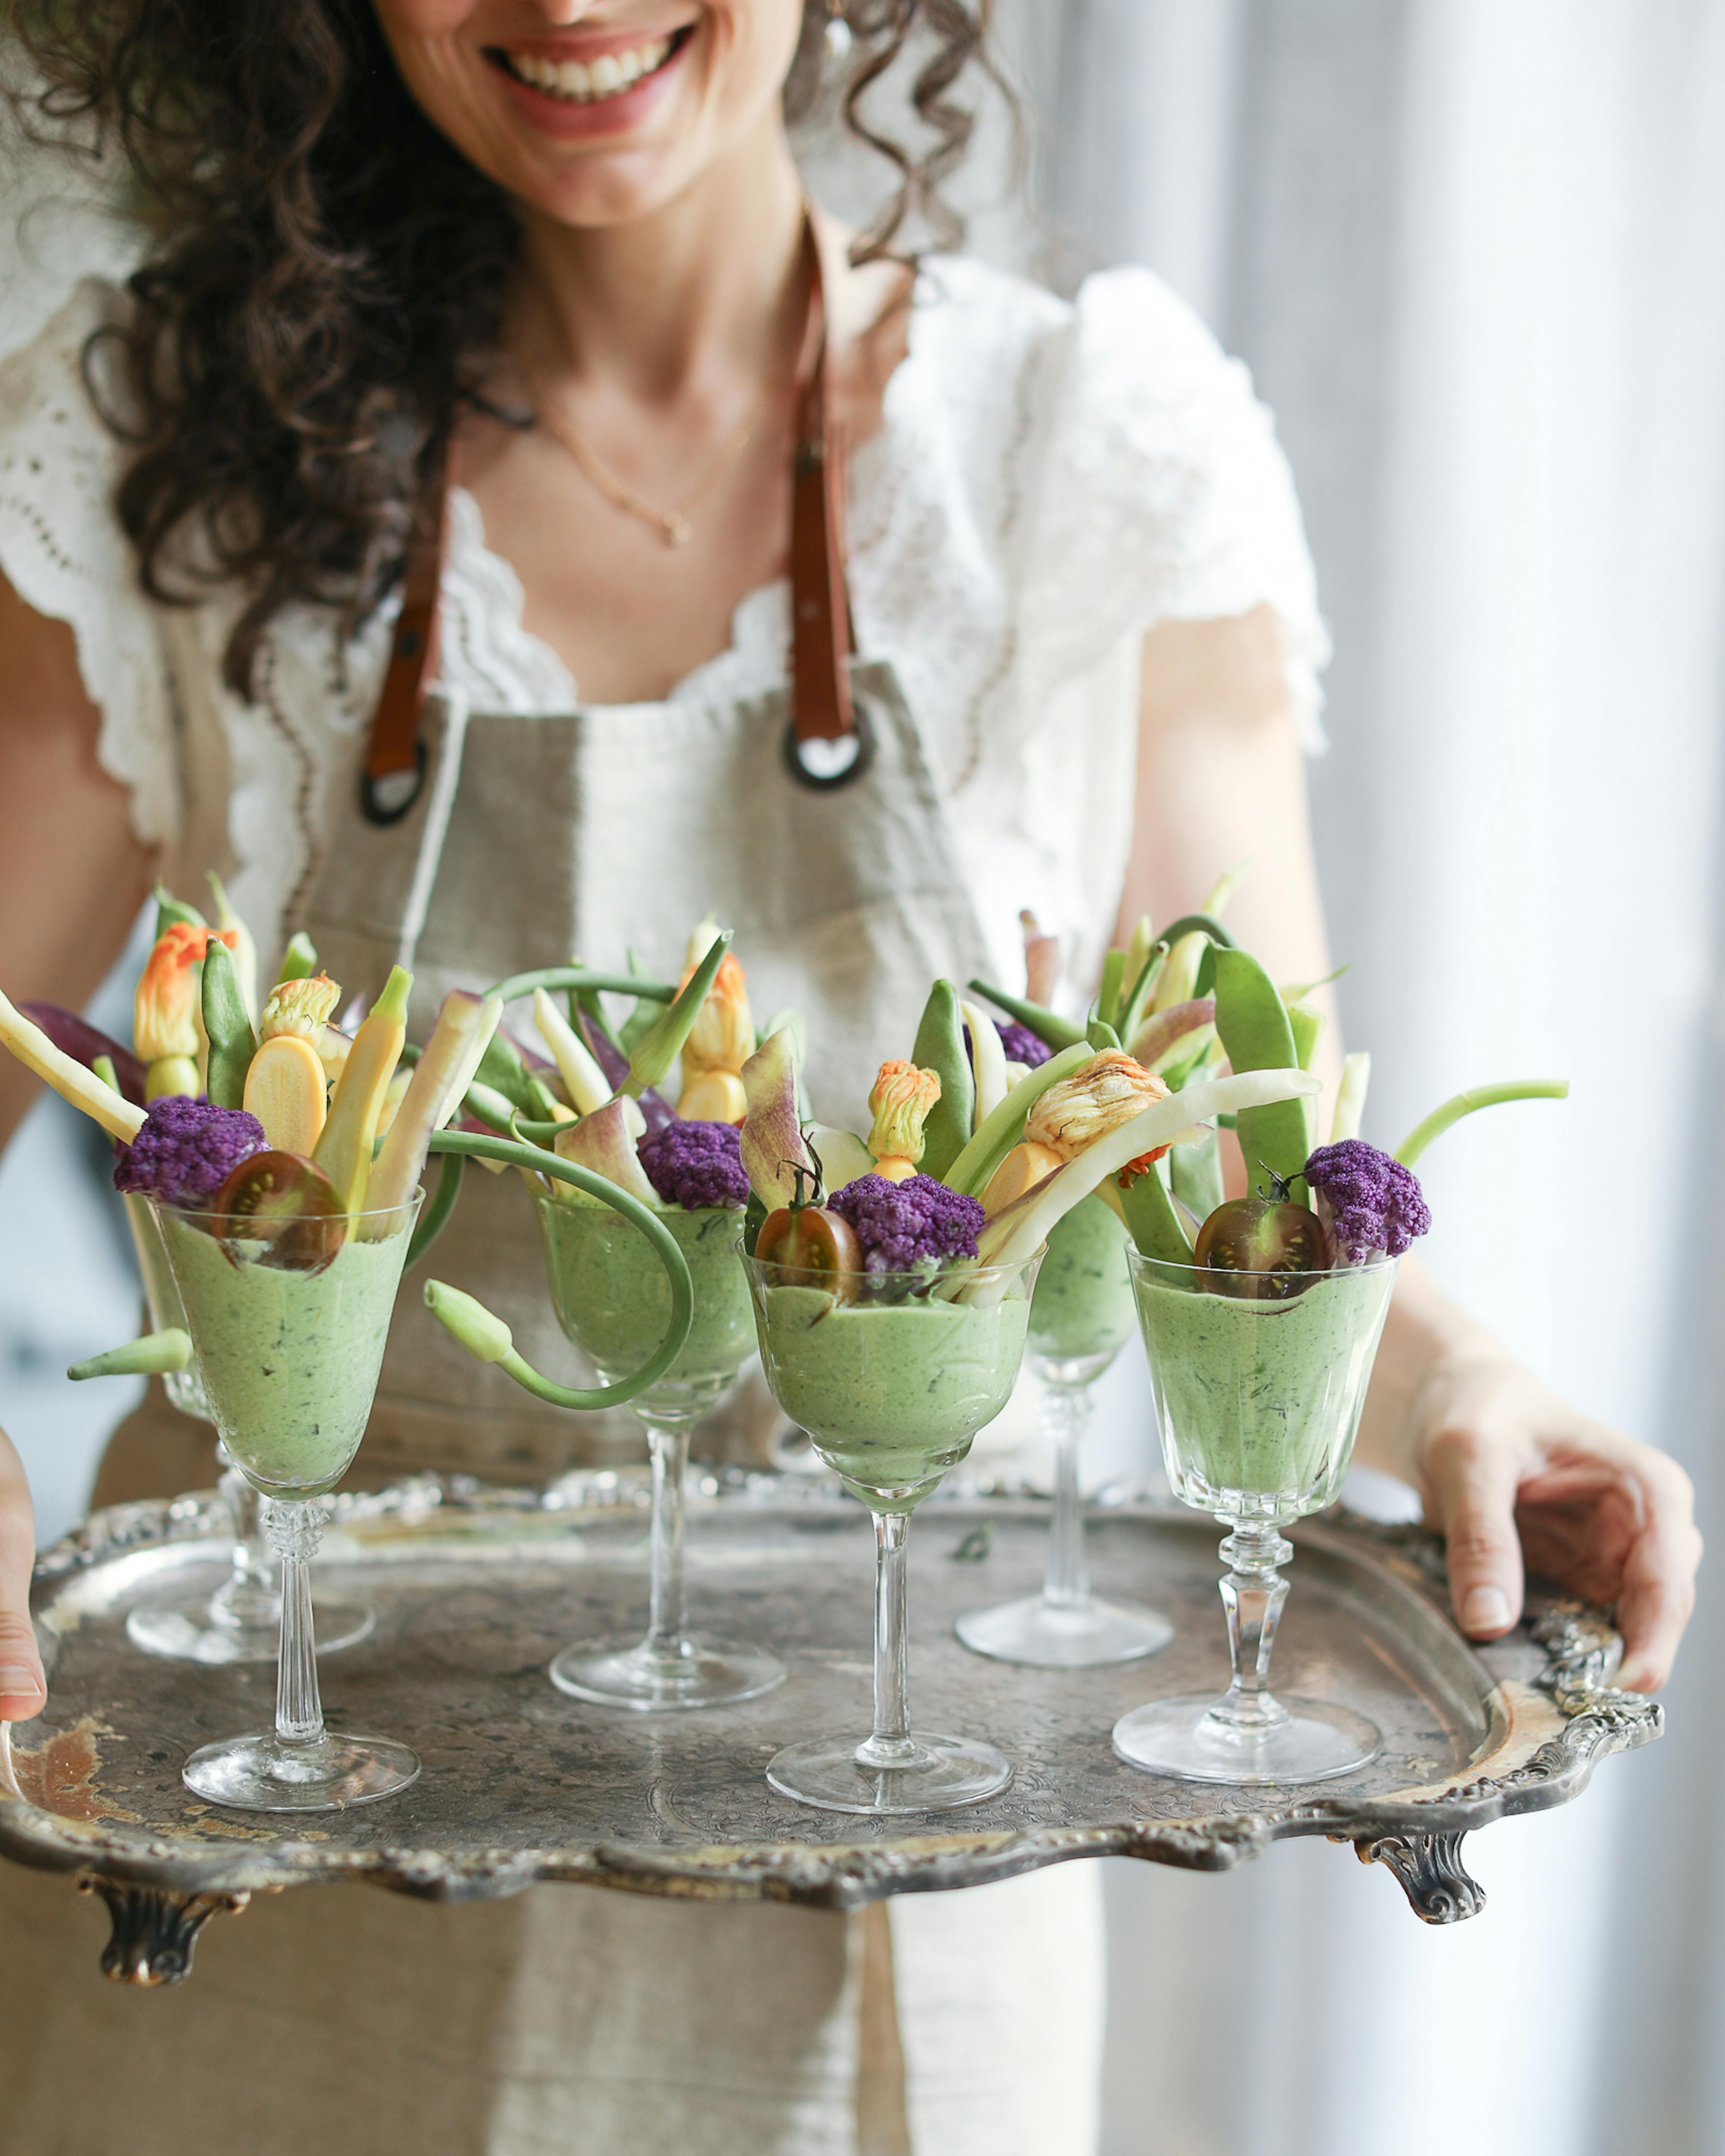 elisa holding crudité cups on a tray